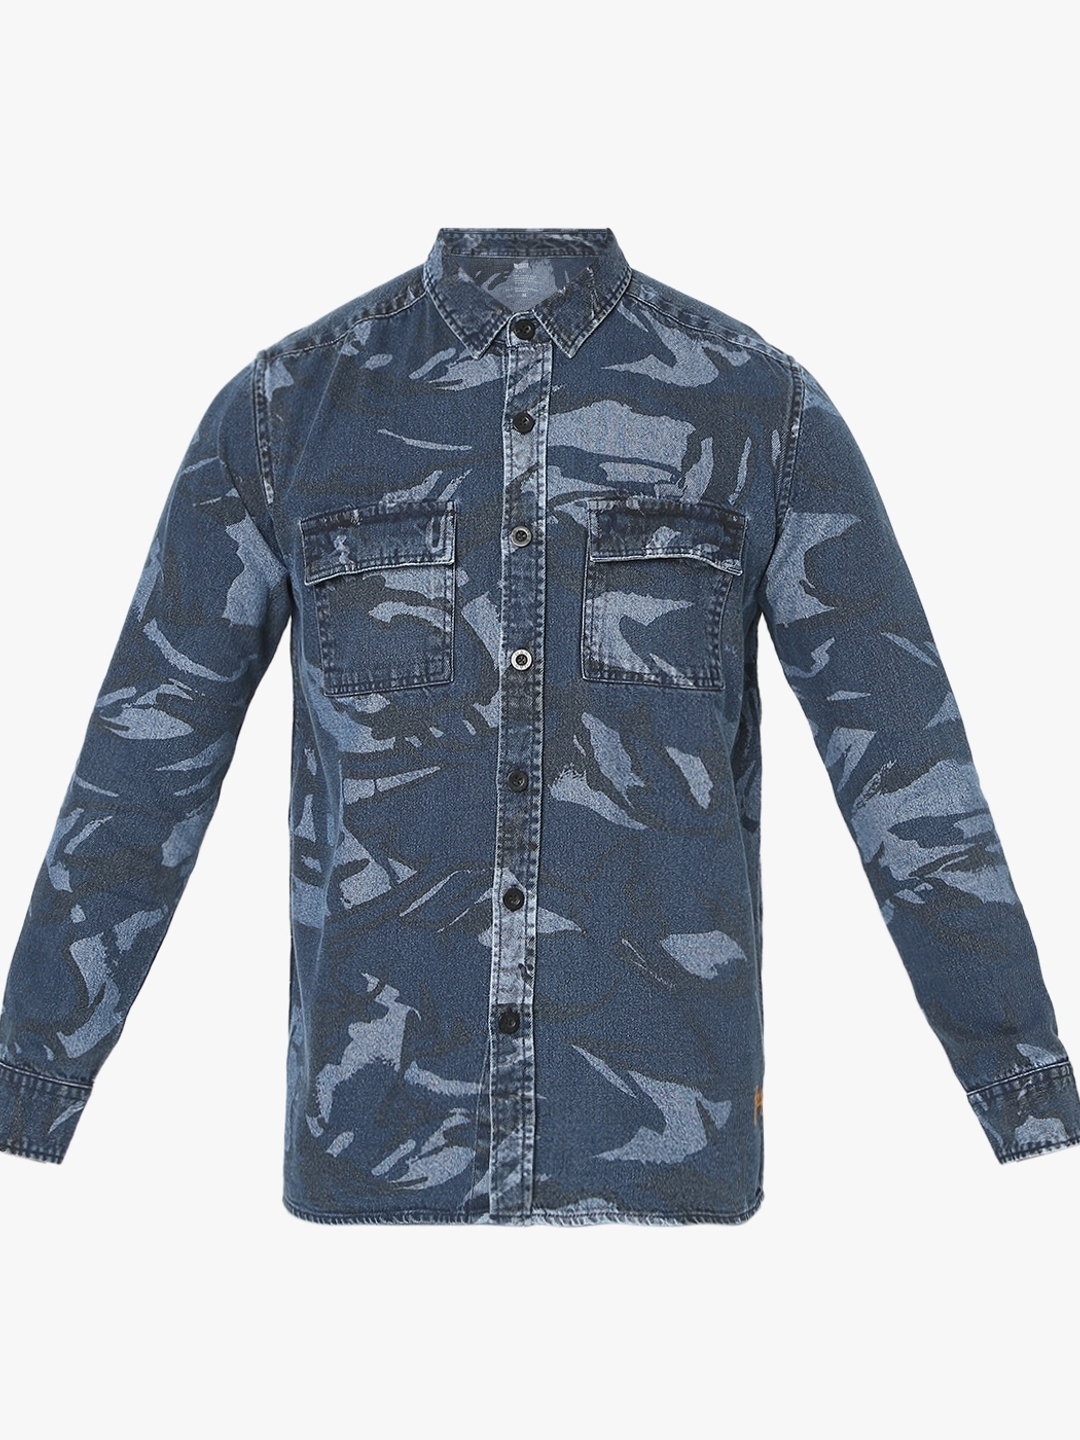 Darion Neo Camouflage Print IN Shirt